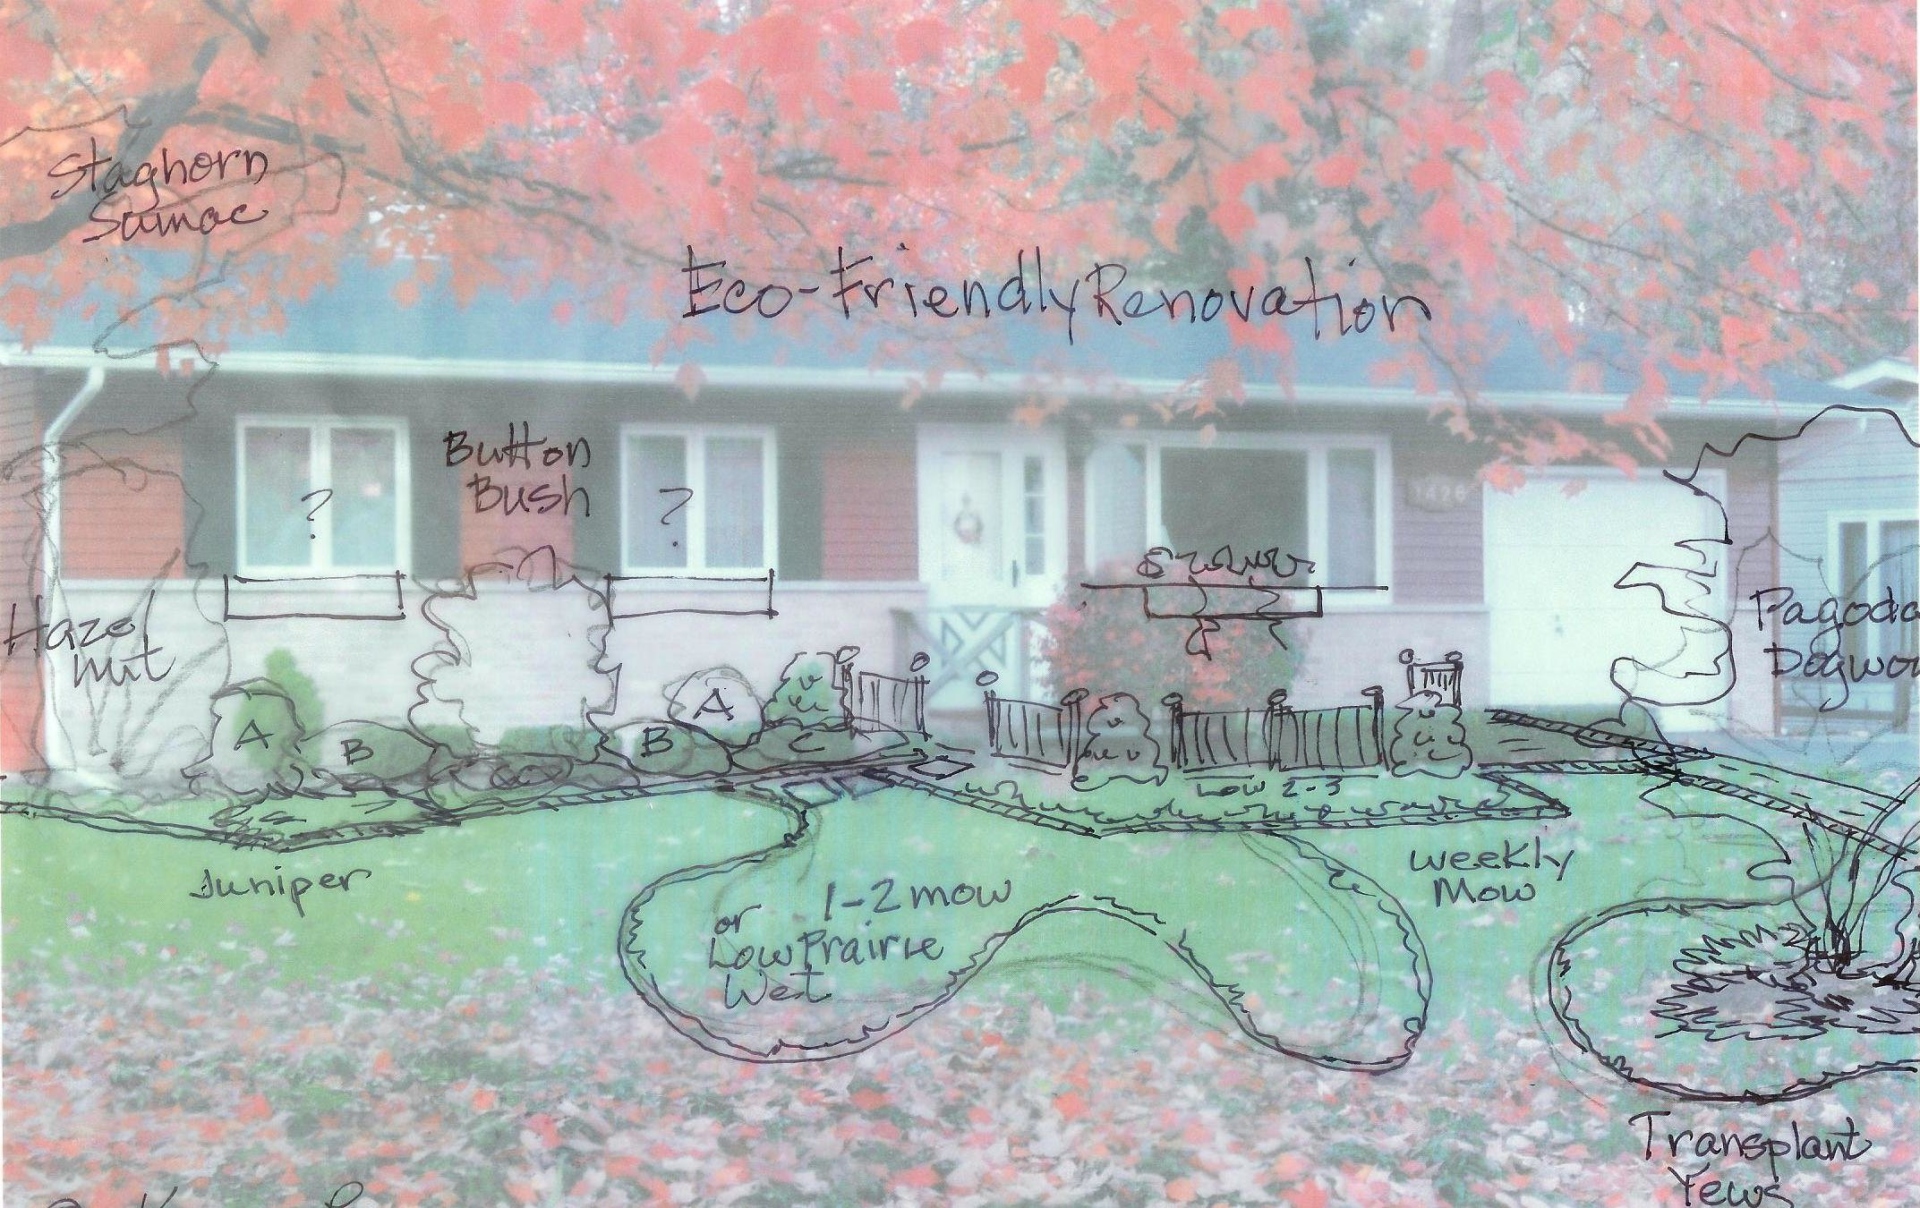 Composite image of a garden design map layered over a photo of a house